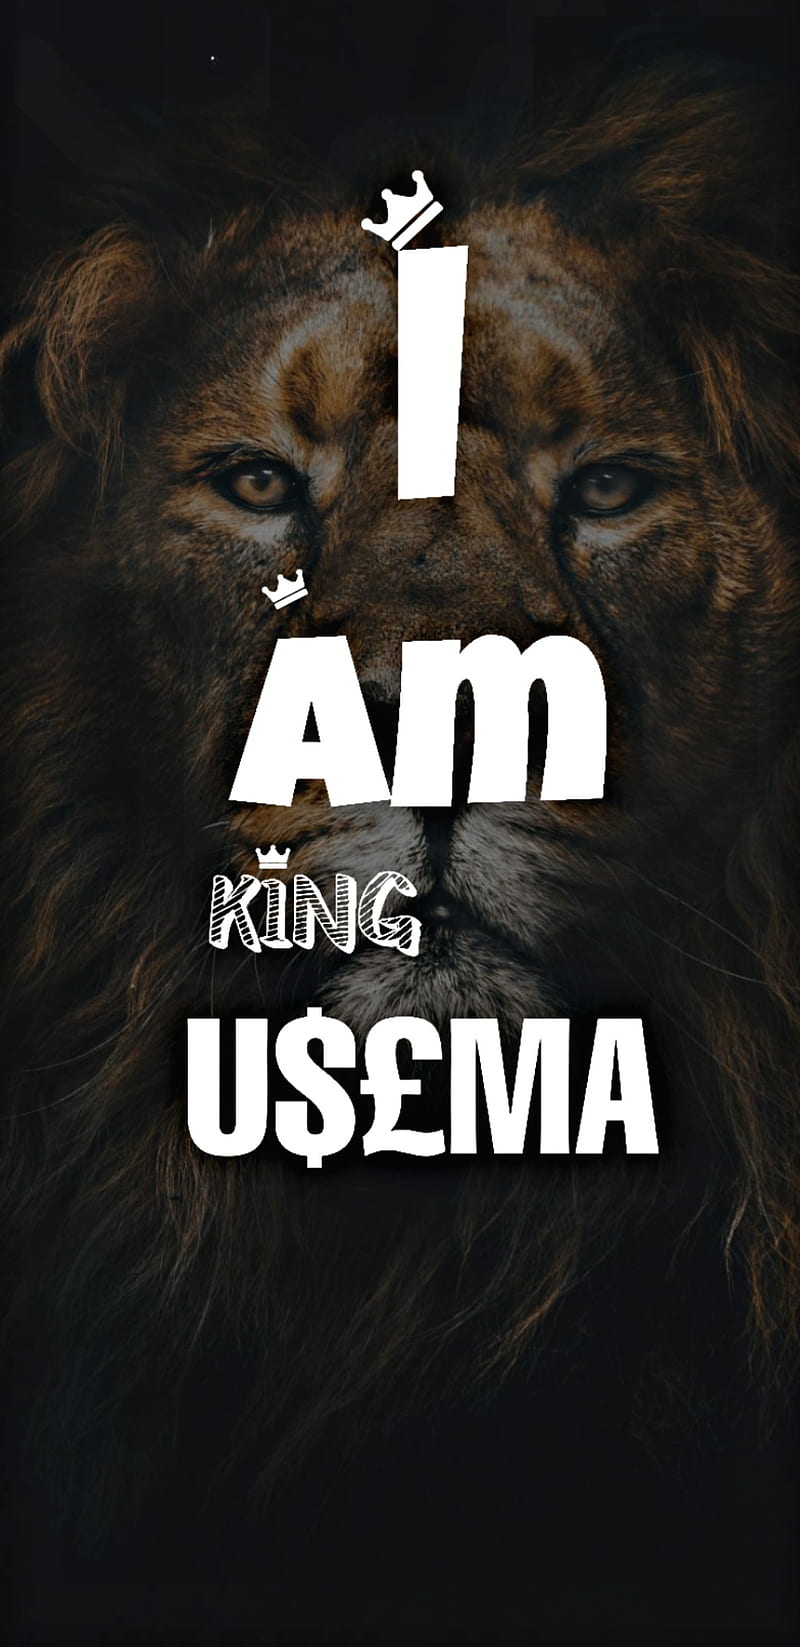 I m king Usama, electricity, king, lion, lions, marshmellow, neon, space, star, usama, wolf, HD phone wallpaper